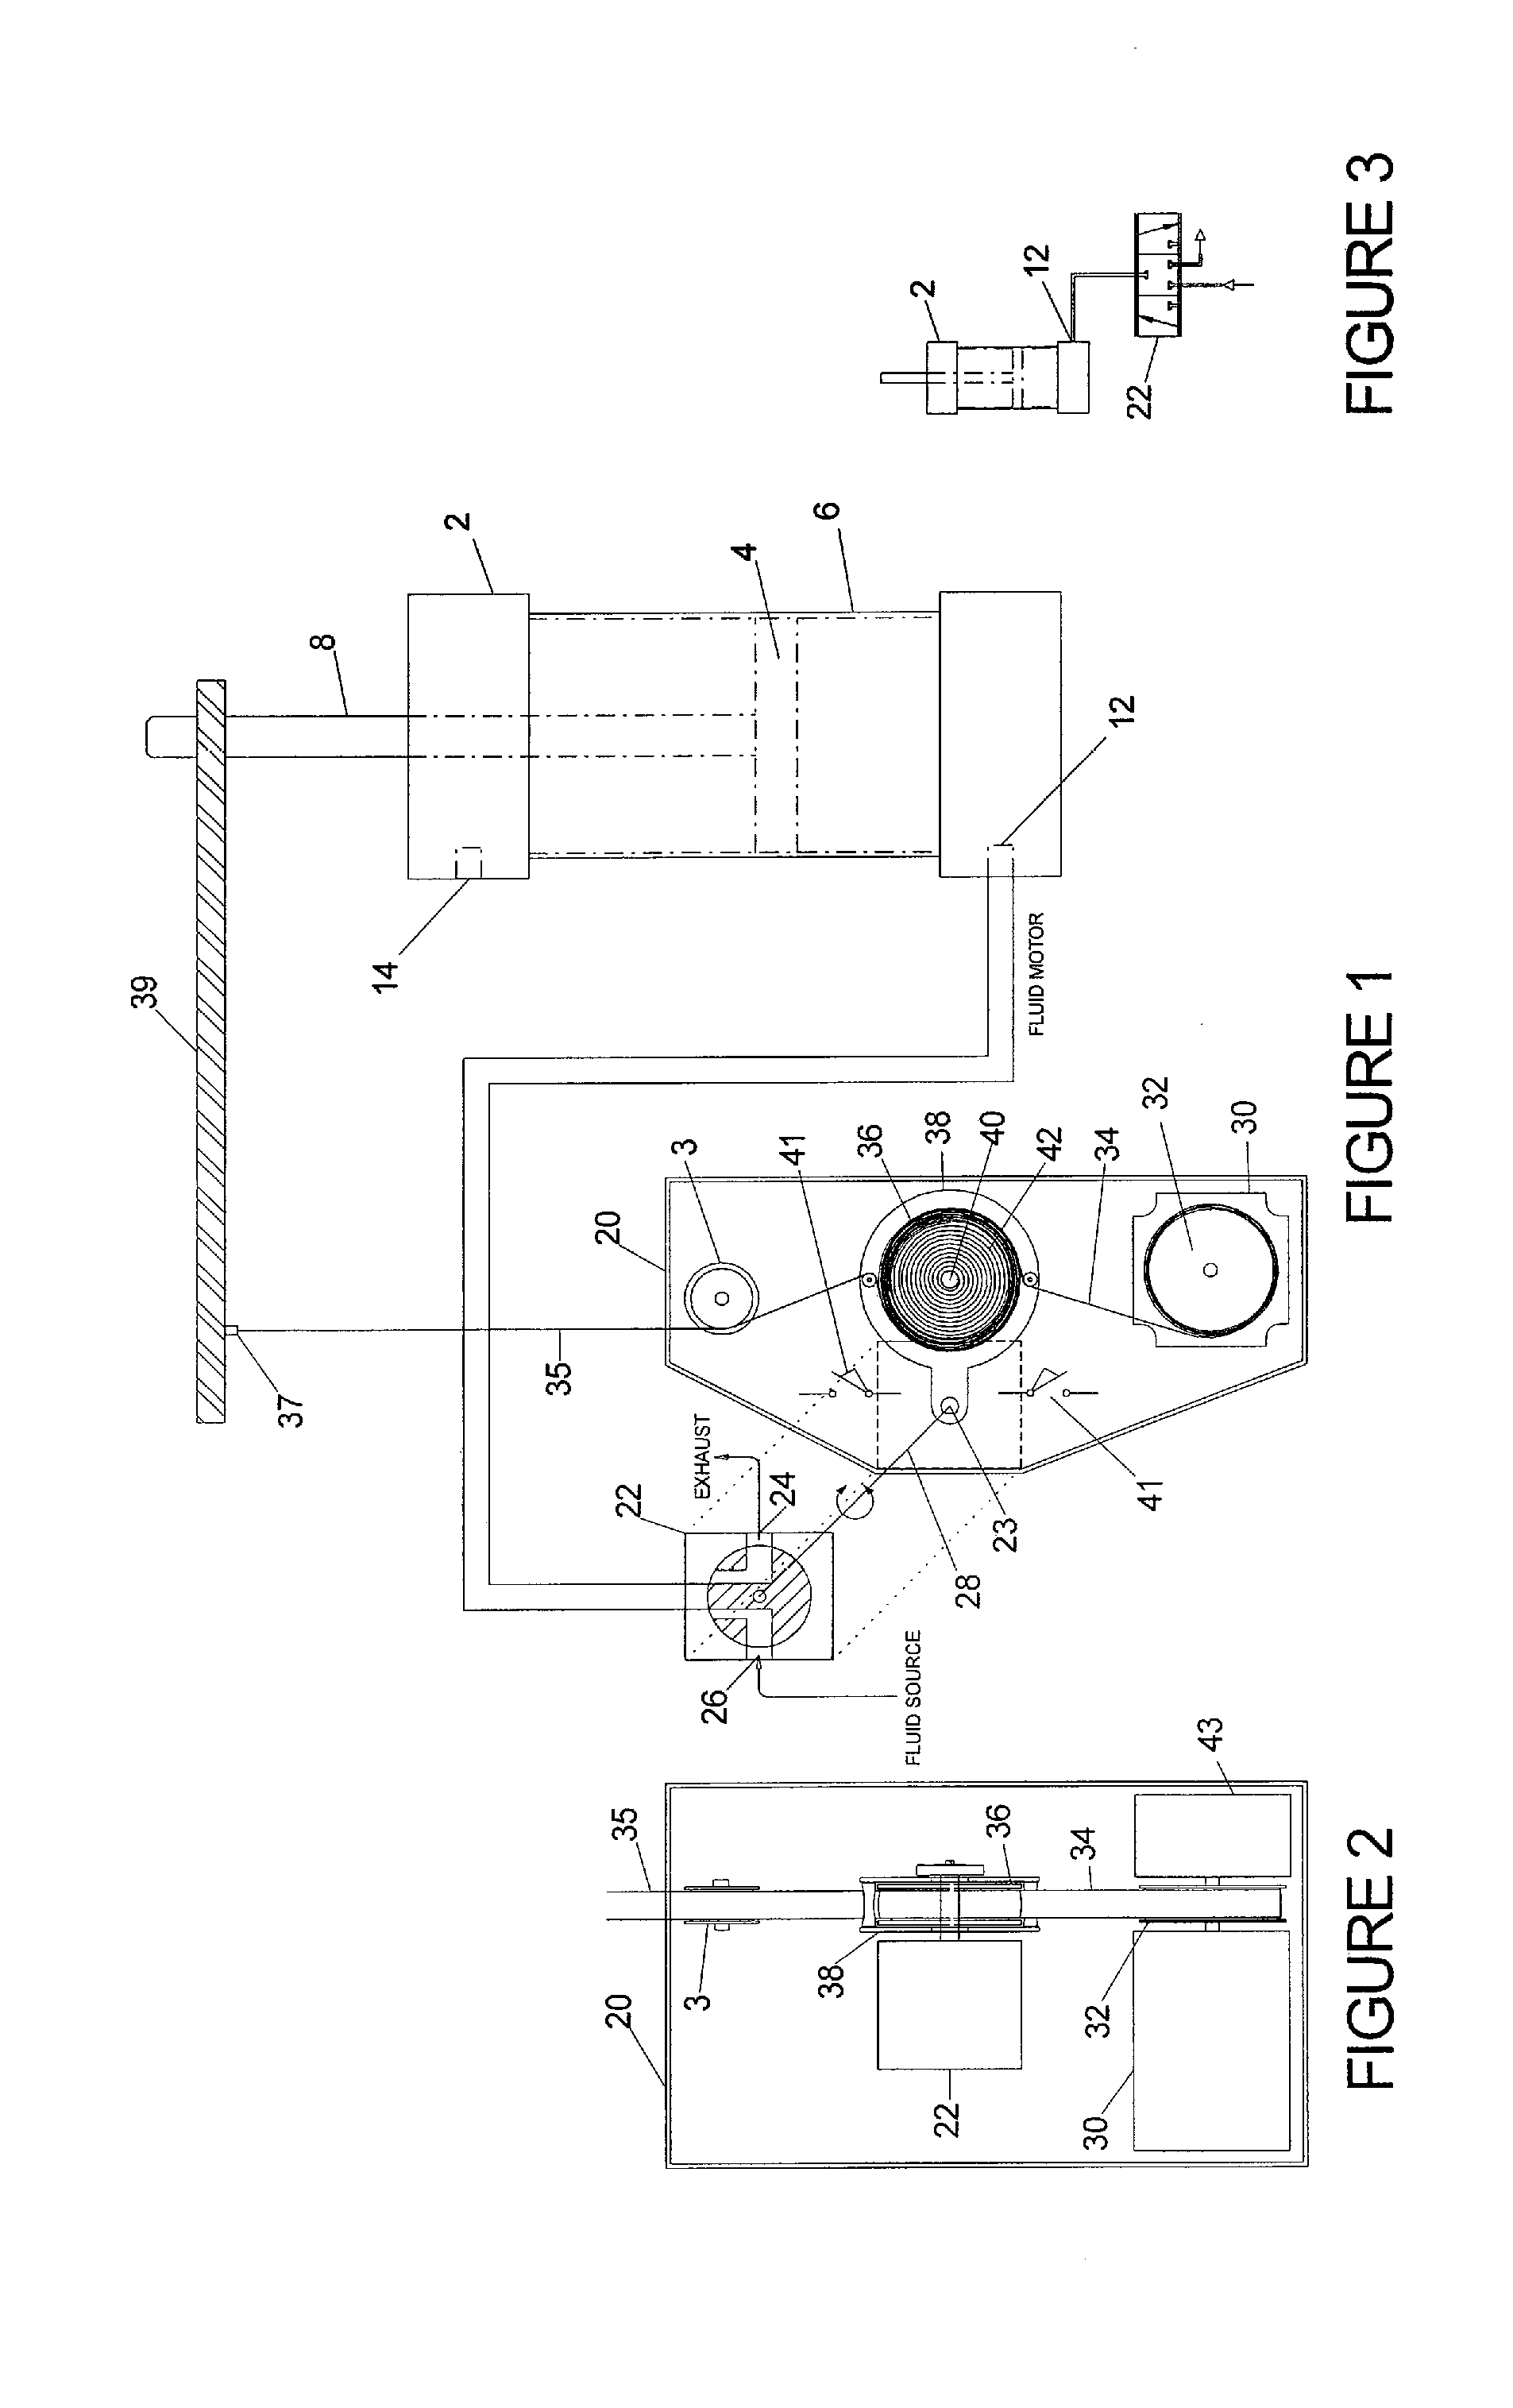 Electro-mechanical control system for positioning fluid motors